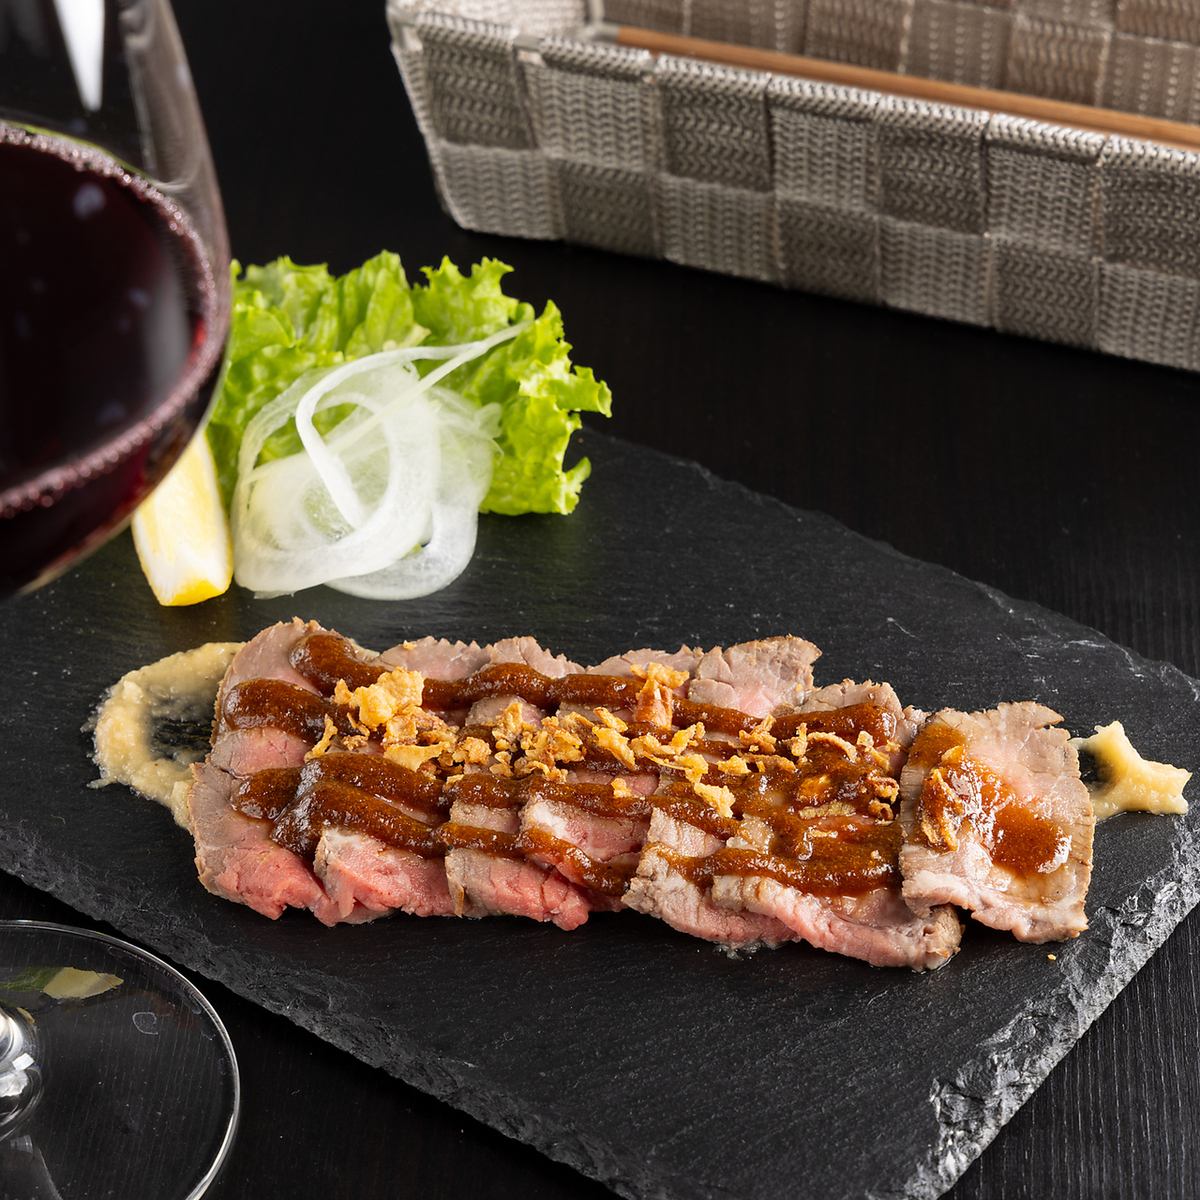 2 minutes walk from Taisho Station! Enjoy homemade roast beef and creative pasta! Perfect for banquets and girls' night out!